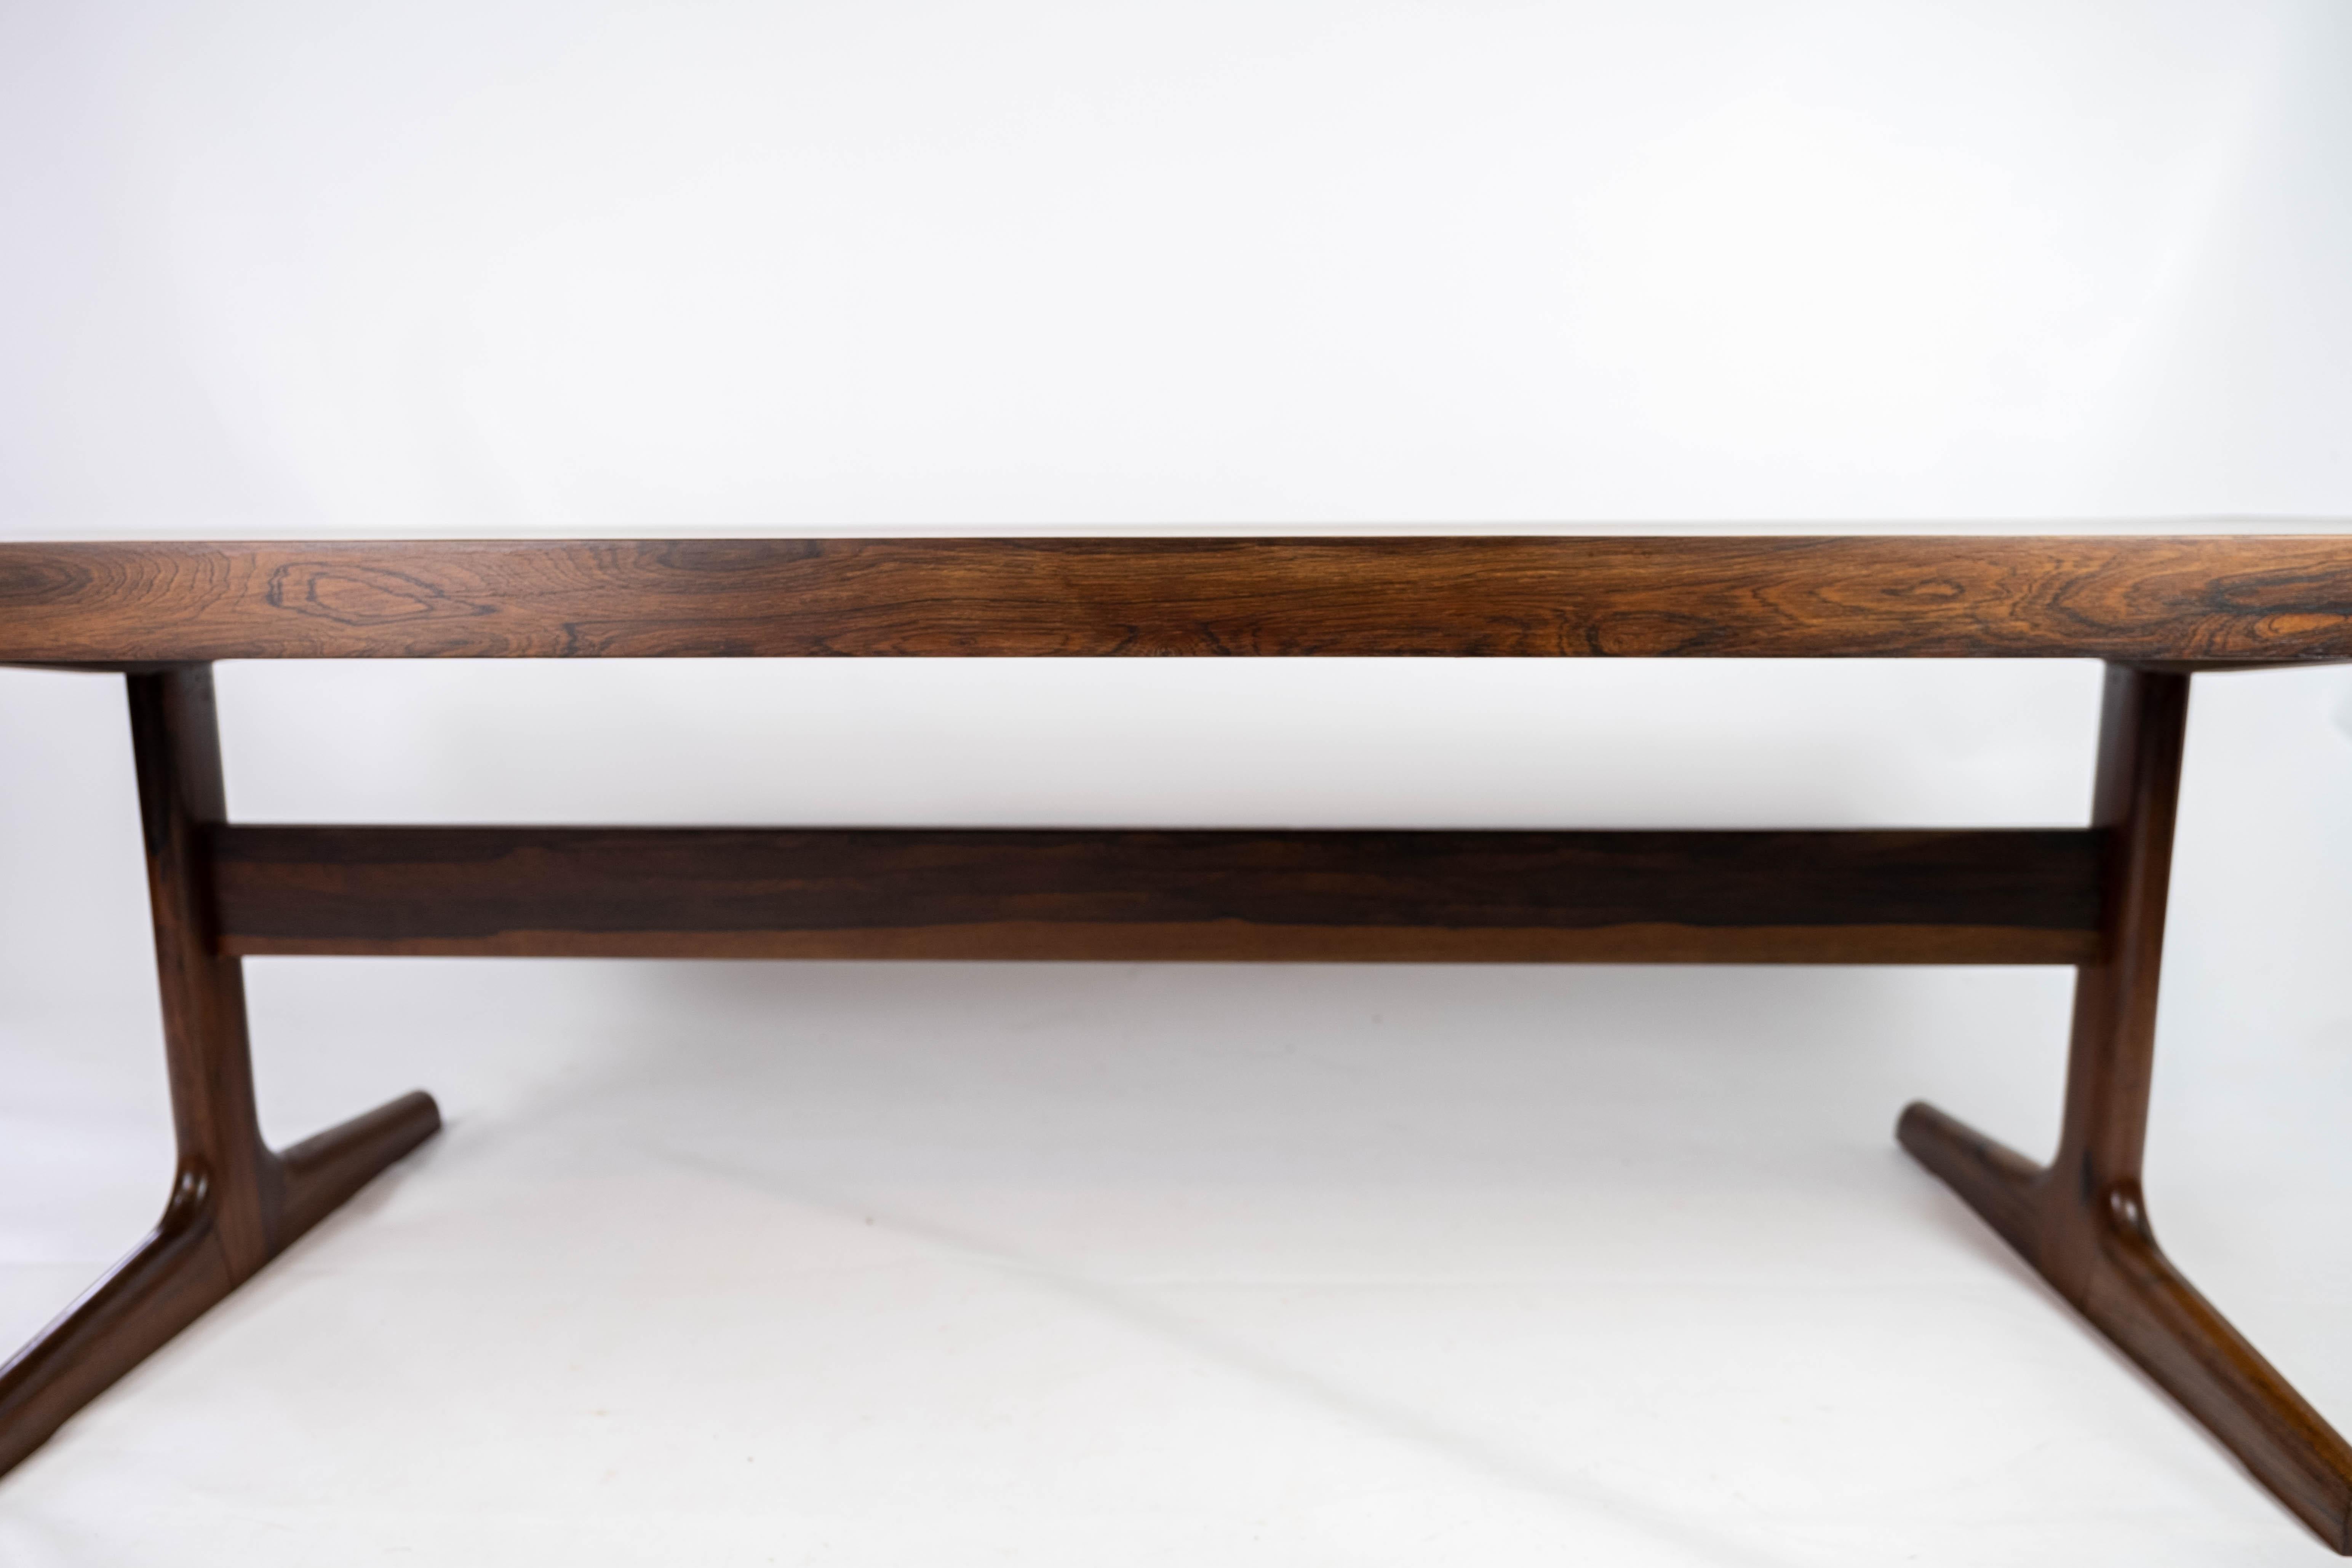 Mid-20th Century Coffee Table Made In Rosewood With Shaker Legs, Danish Design From 1960s For Sale